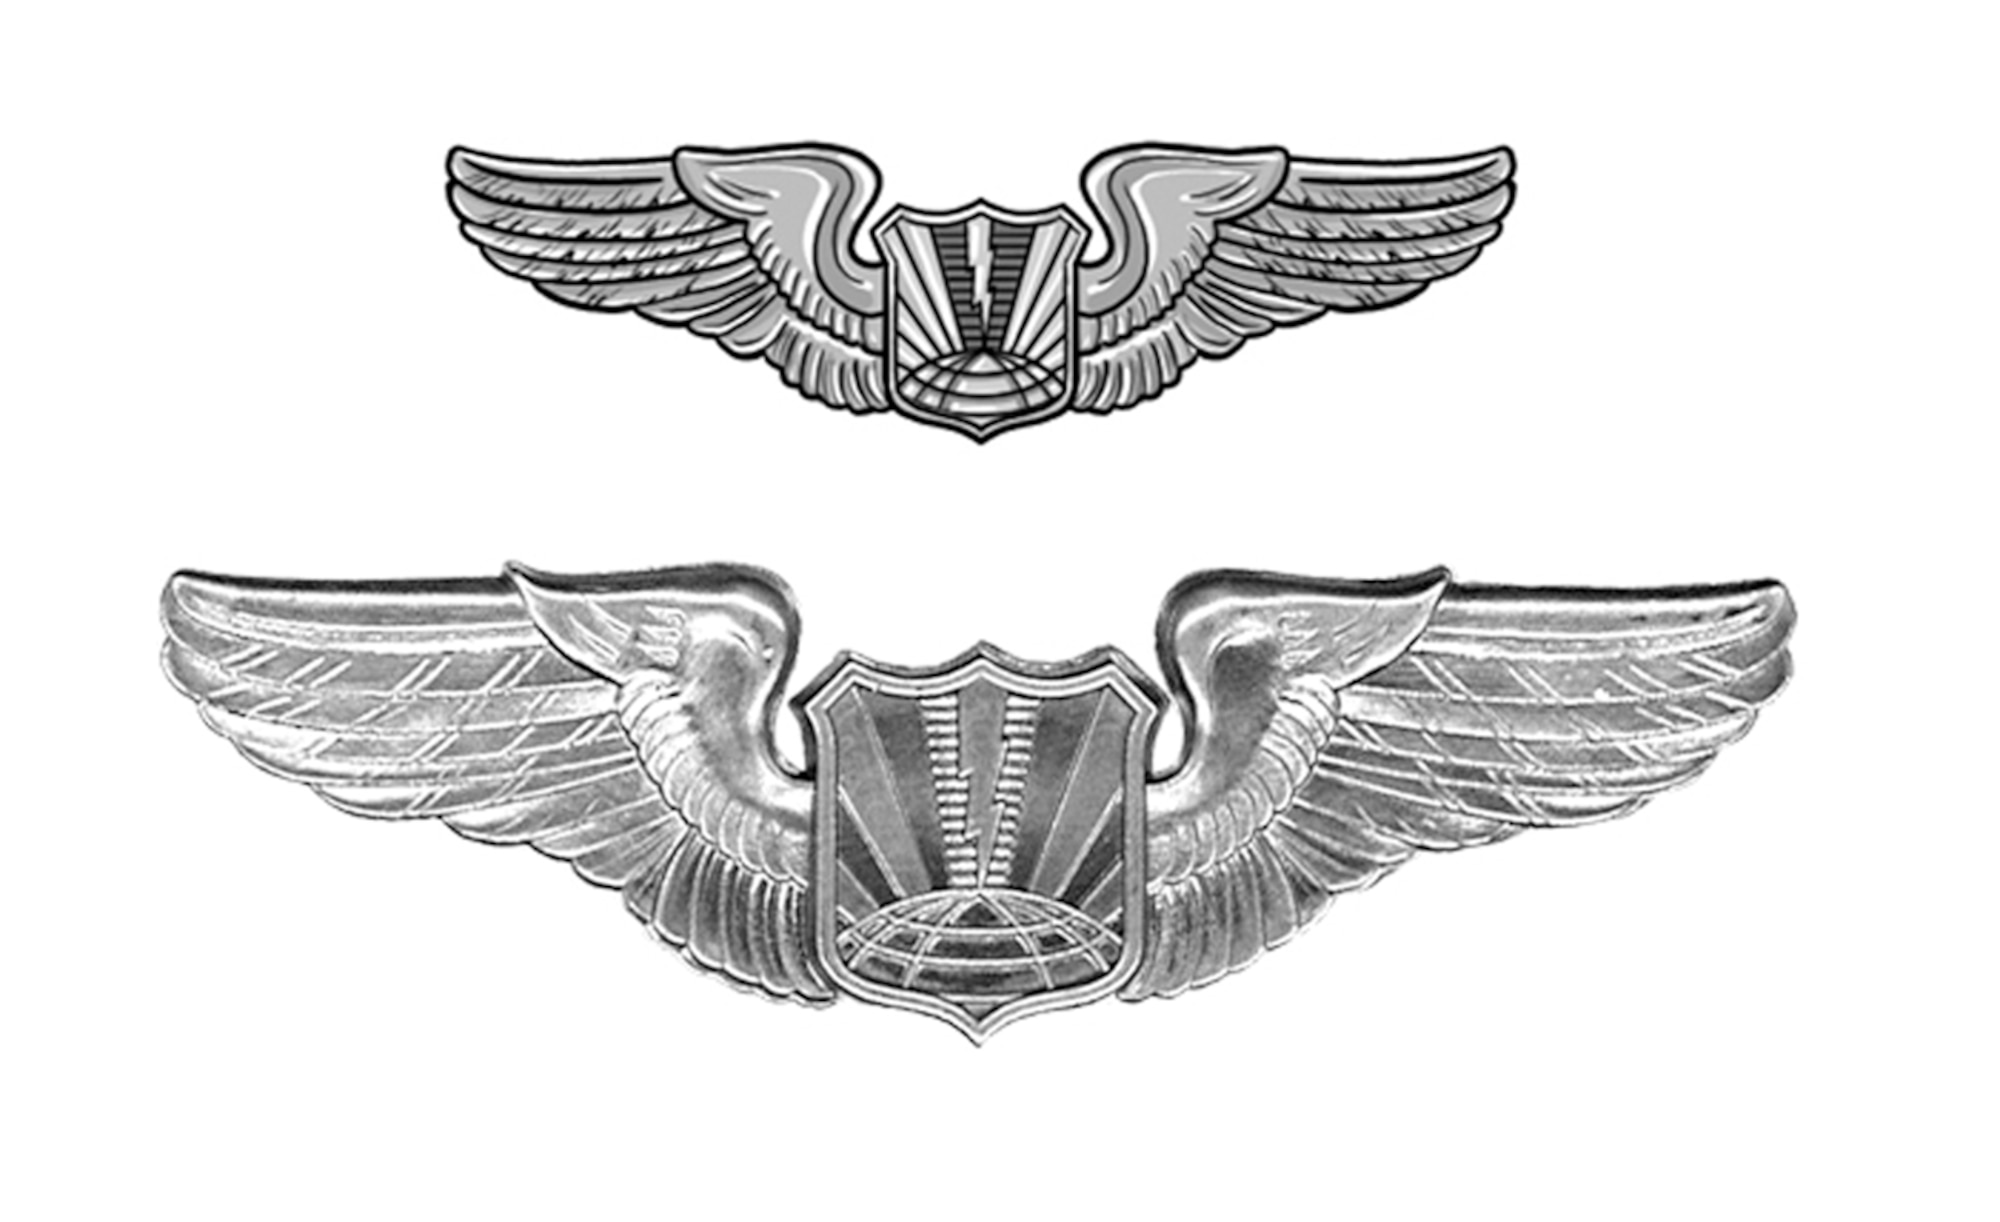 These wings, recently approved by Air Force Chief of Staff Gen. Norton Schwartz, are worn by unmanned aircraft operators who have not attended undergraduate pilot training.  The wings were presented to the graduates of first Beta class during a ceremony at Creech Air Force Base, Nev., Sept. 25, 2009.  The wings were designed by Staff Sgt. Austin May, a public affairs craftsman from the 100th Air Refueling Wing, Royal Air Force Mildenhall, England.  (Air Force graphic)